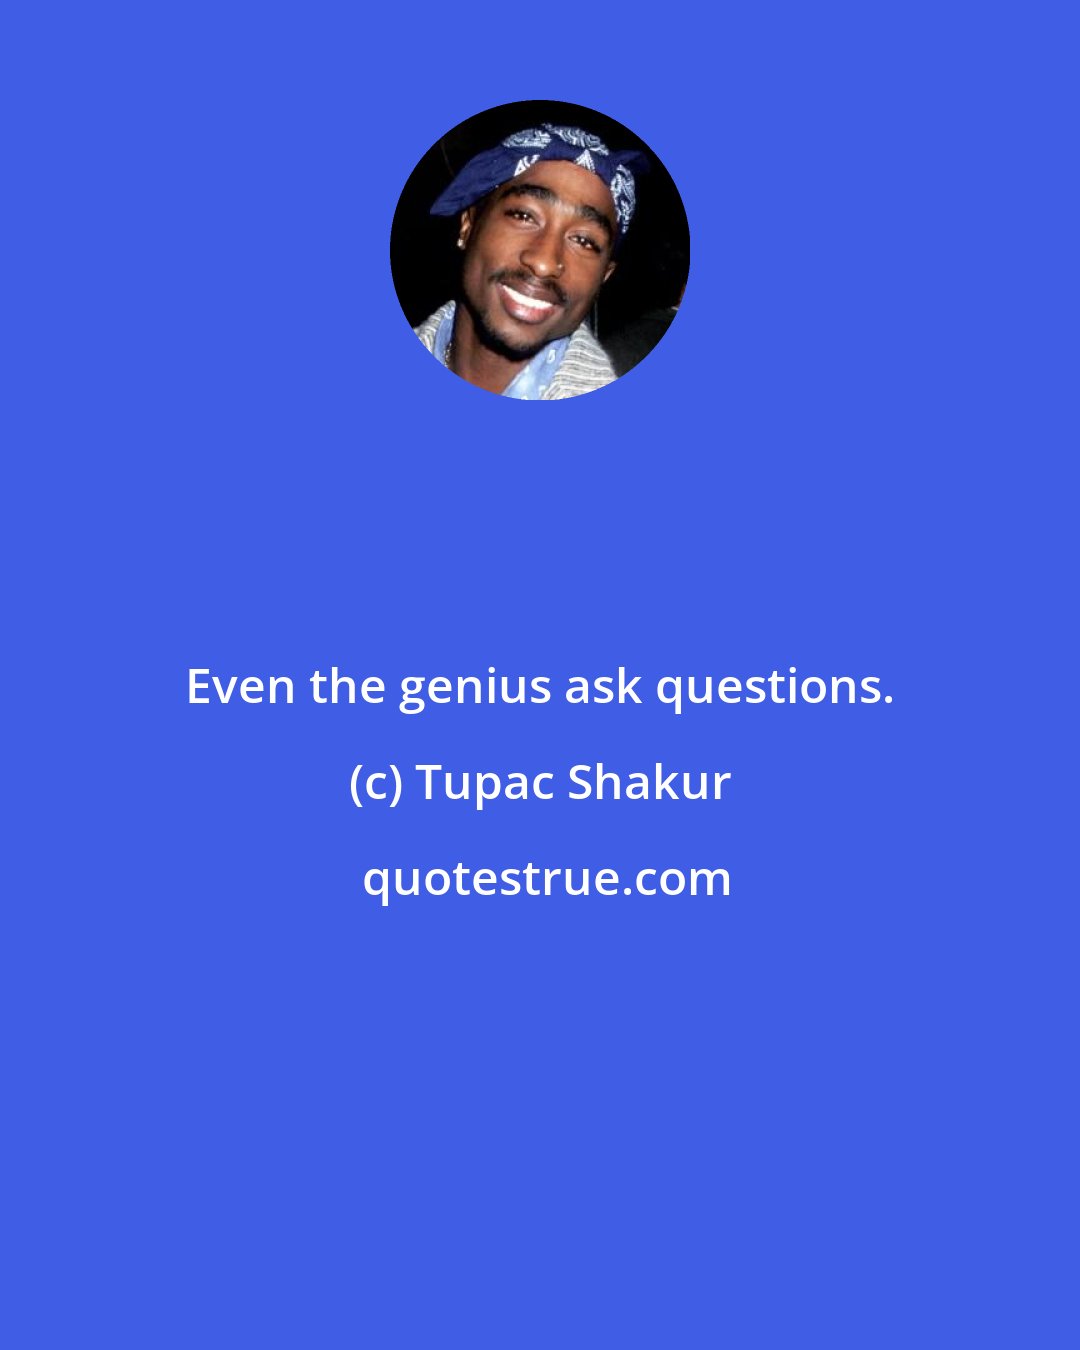 Tupac Shakur: Even the genius ask questions.